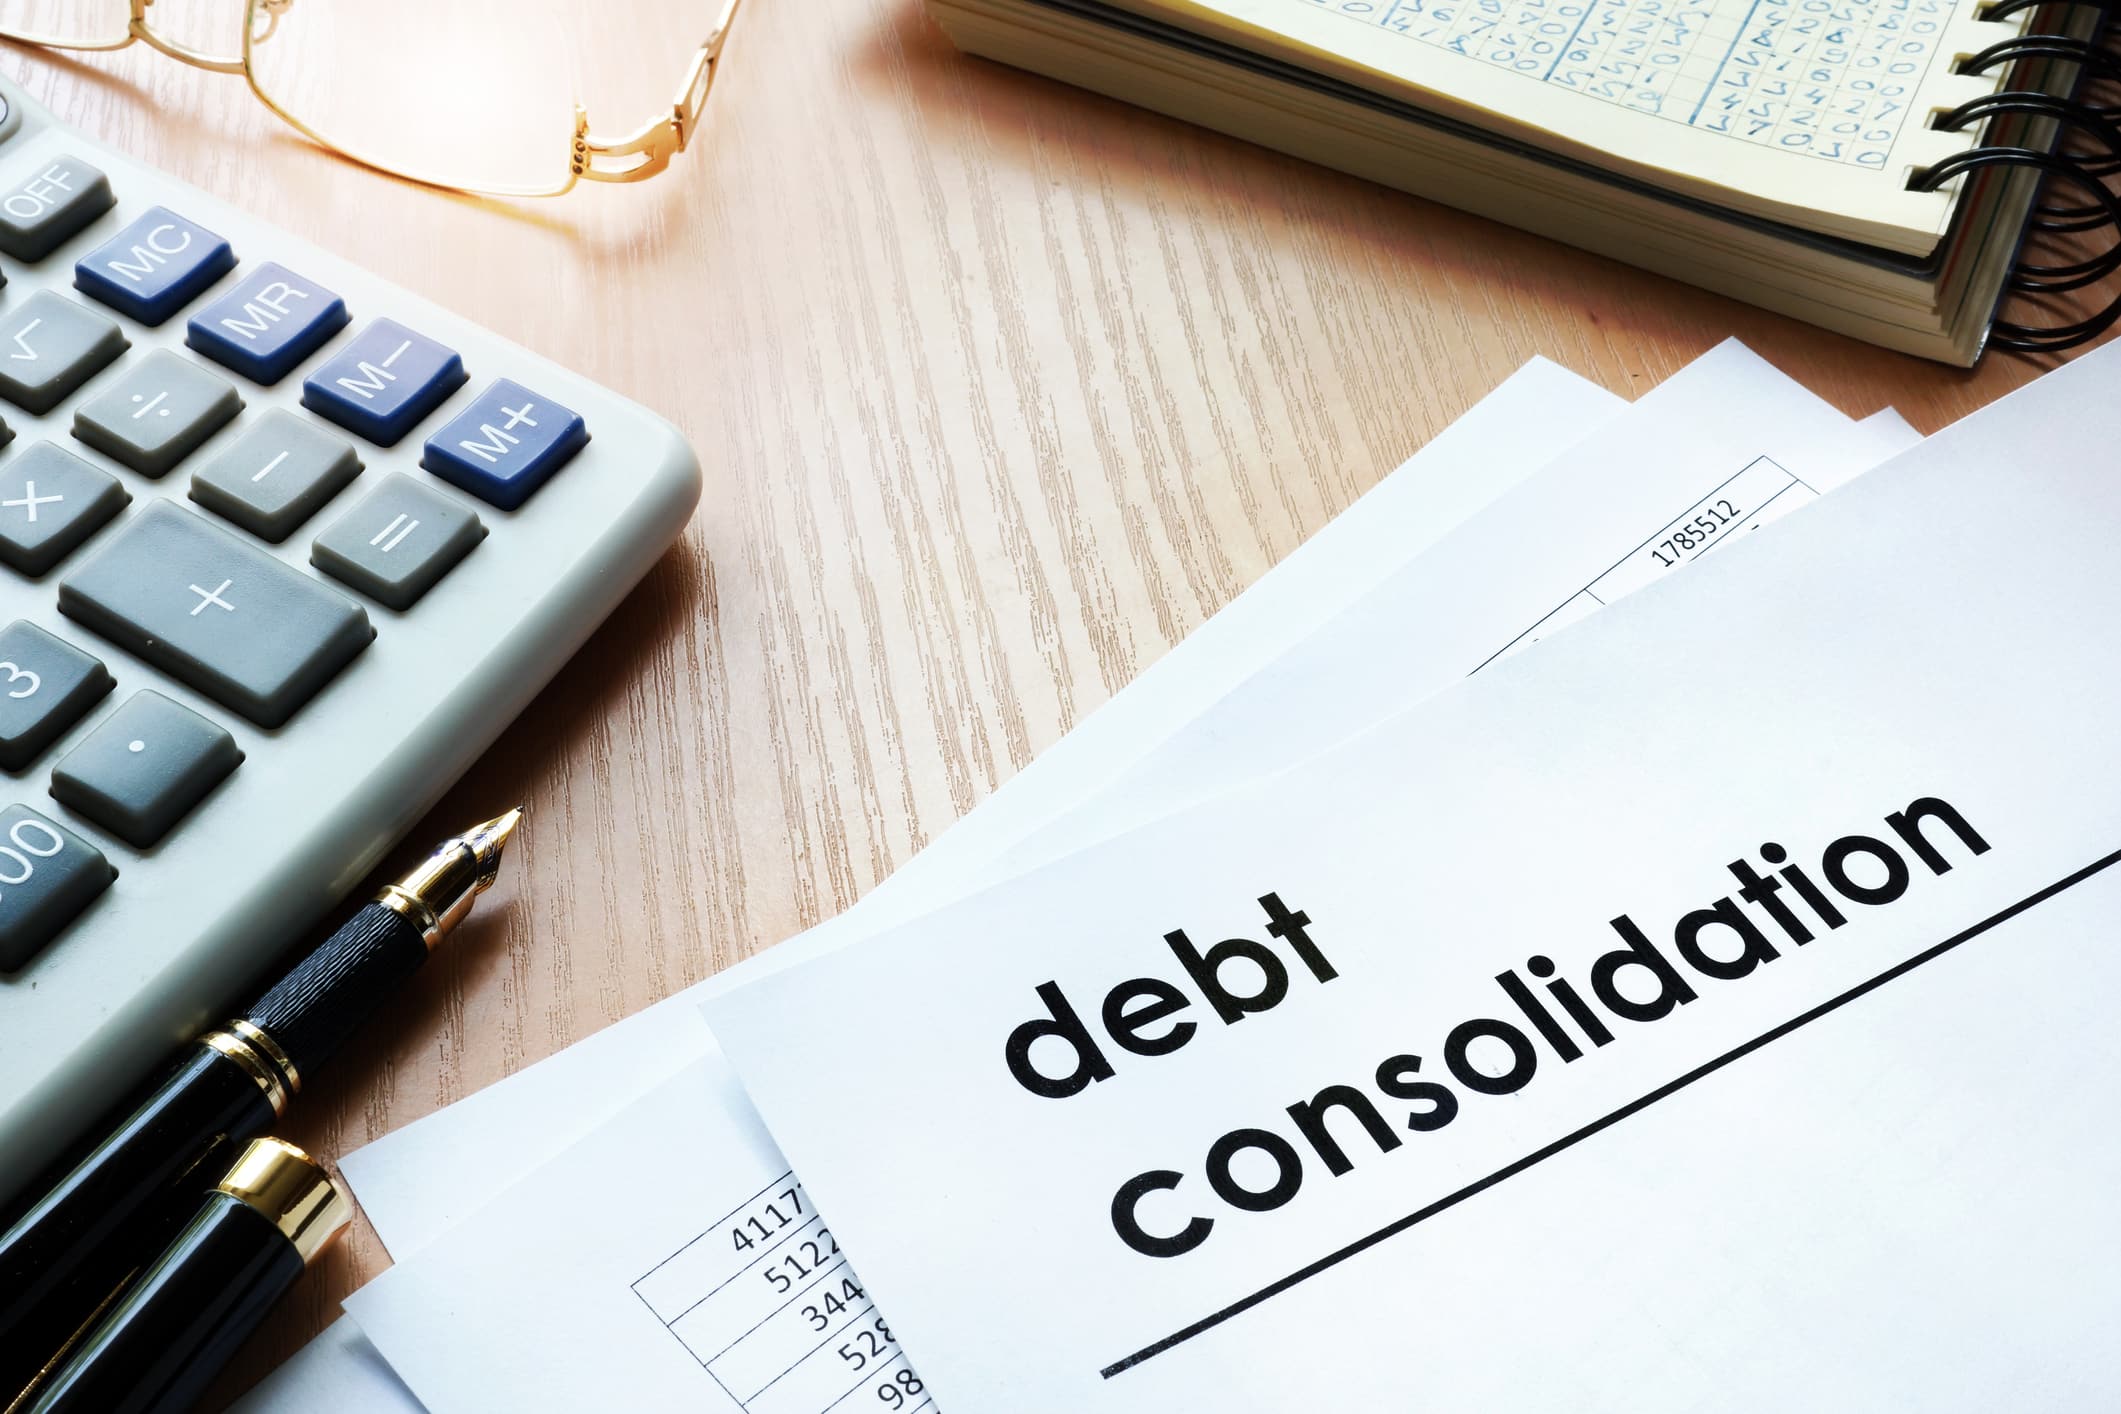 debt consolidation loan. Documents on an office table.